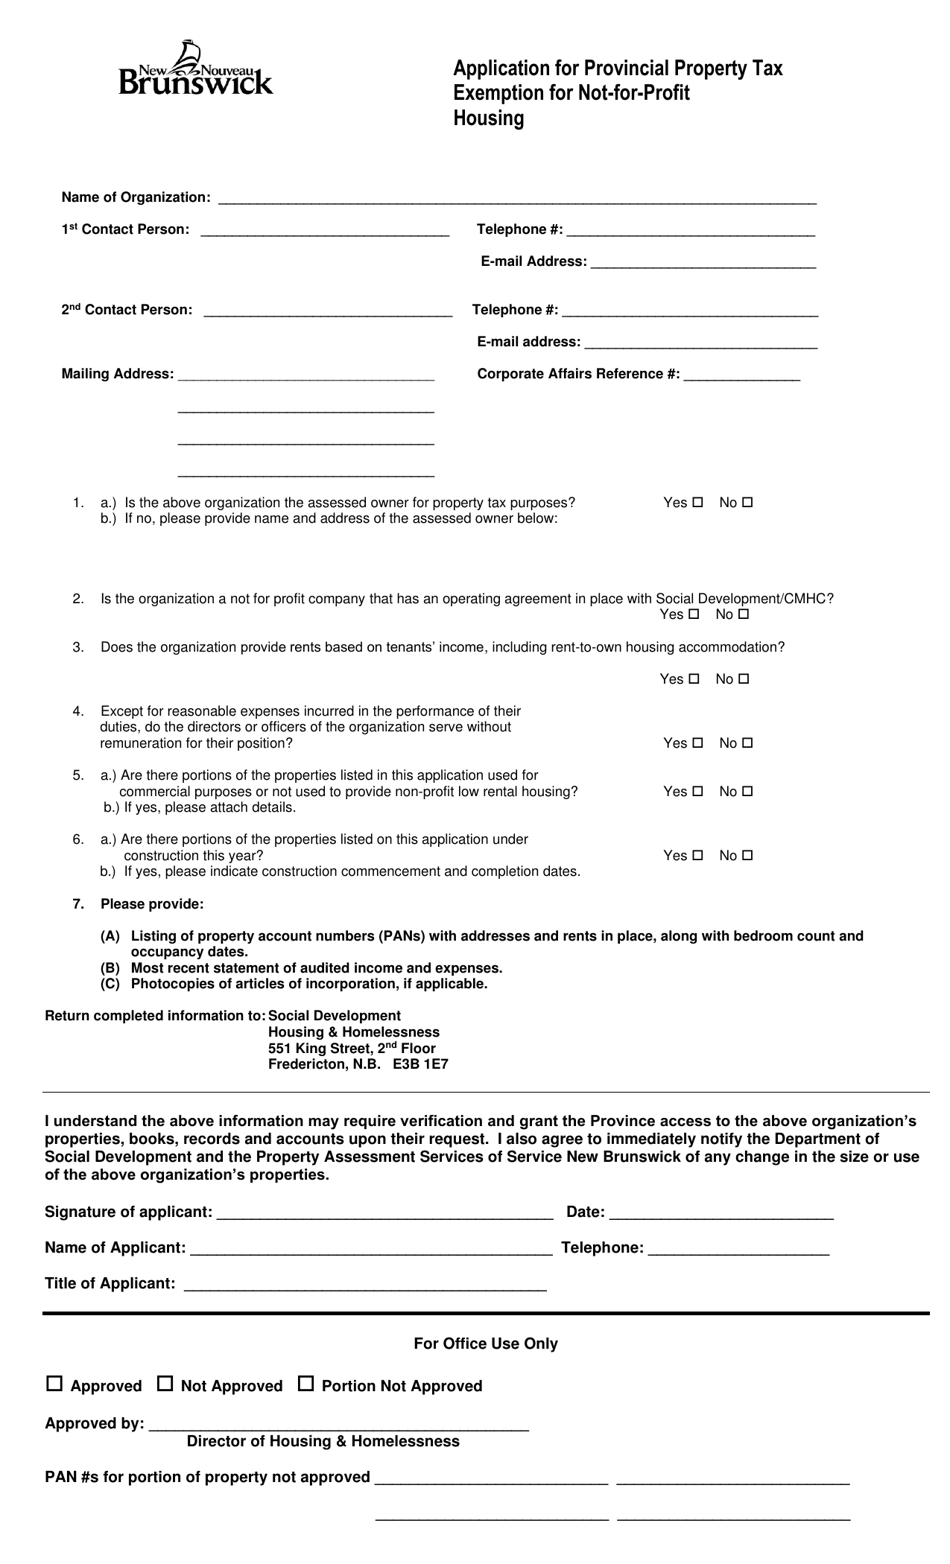 Application for Provincial Property Tax Exemption for Not-For-Profit Housing - New Brunswick, Canada, Page 1